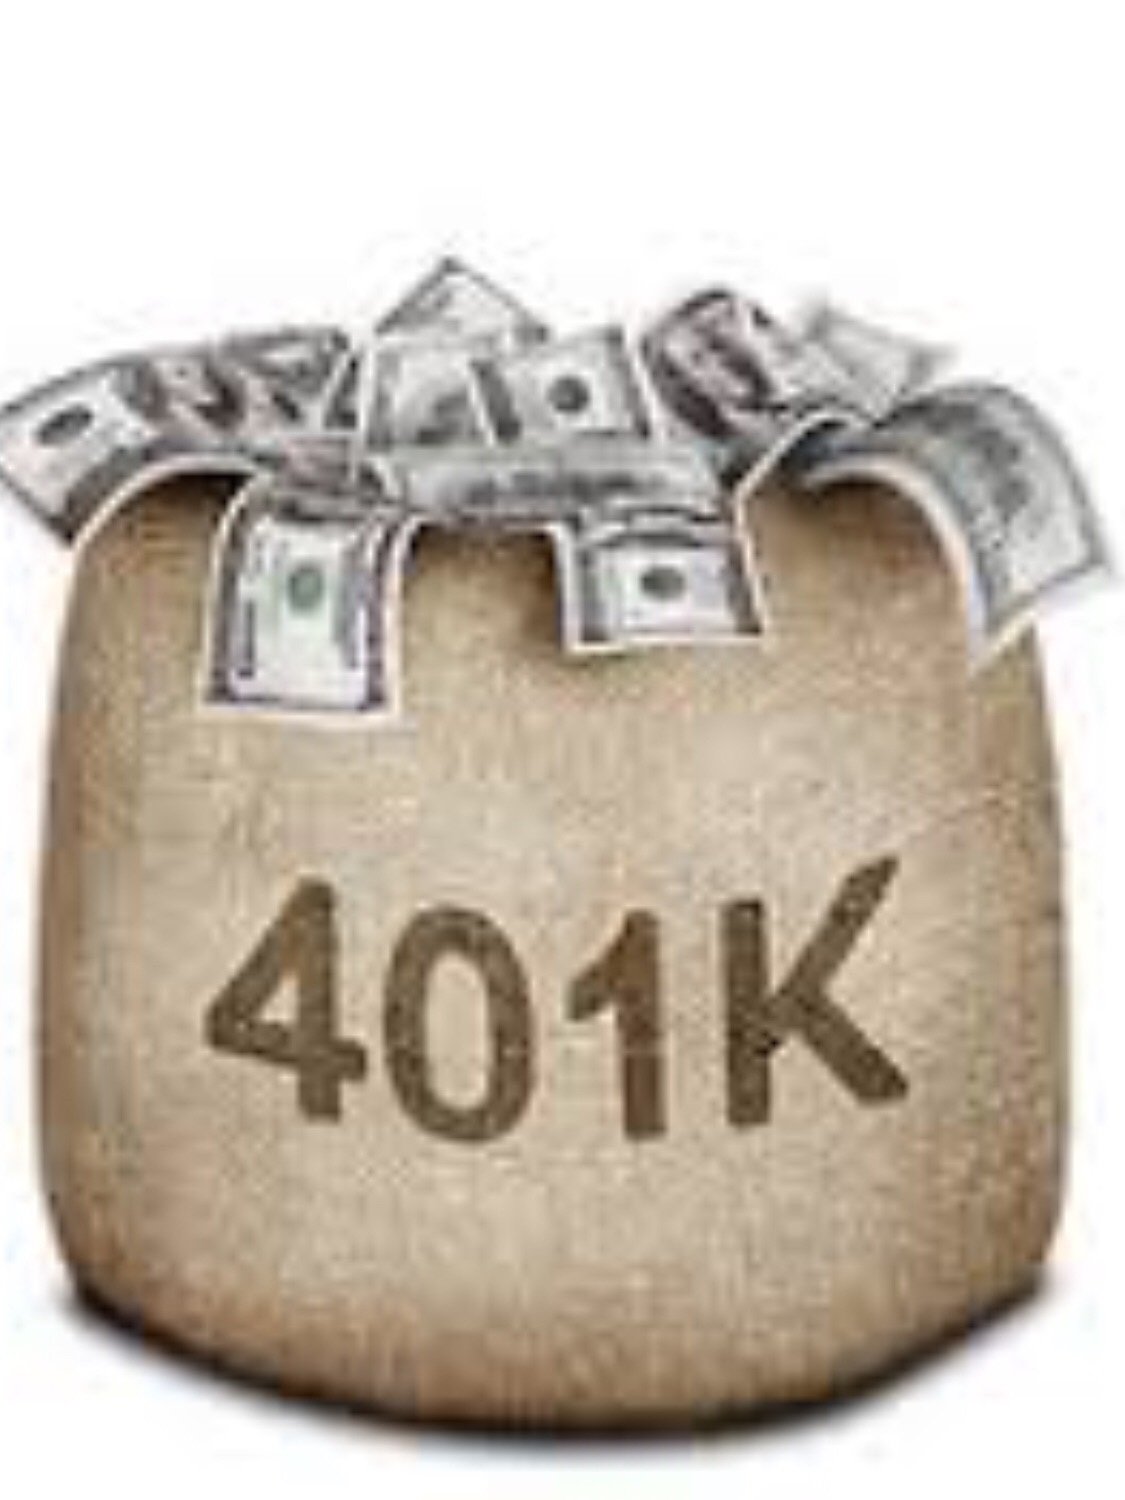 Should You Borrow From Your 401k?